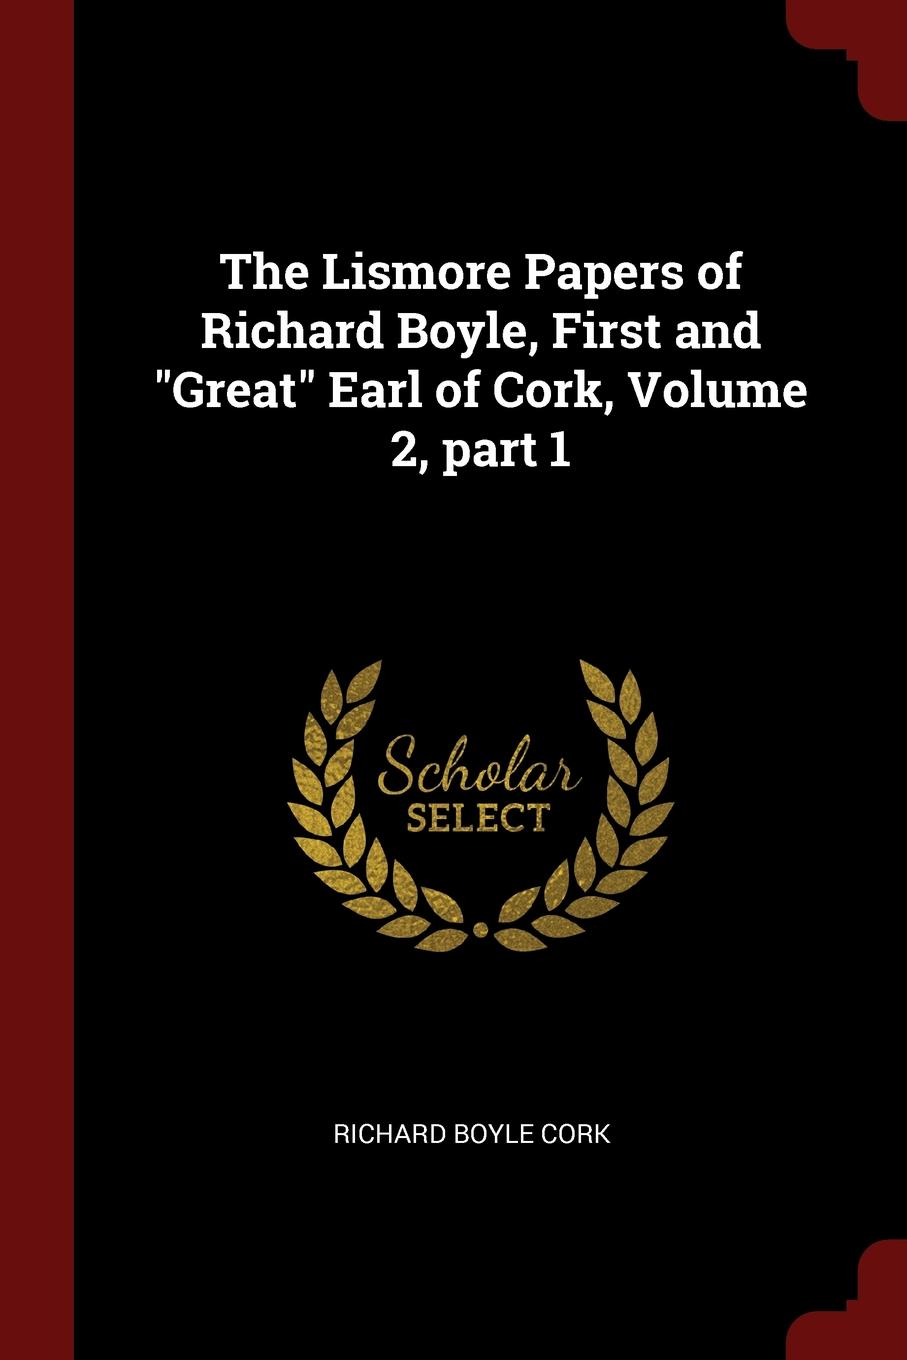 фото The Lismore Papers of Richard Boyle, First and "Great" Earl of Cork, Volume 2, part 1